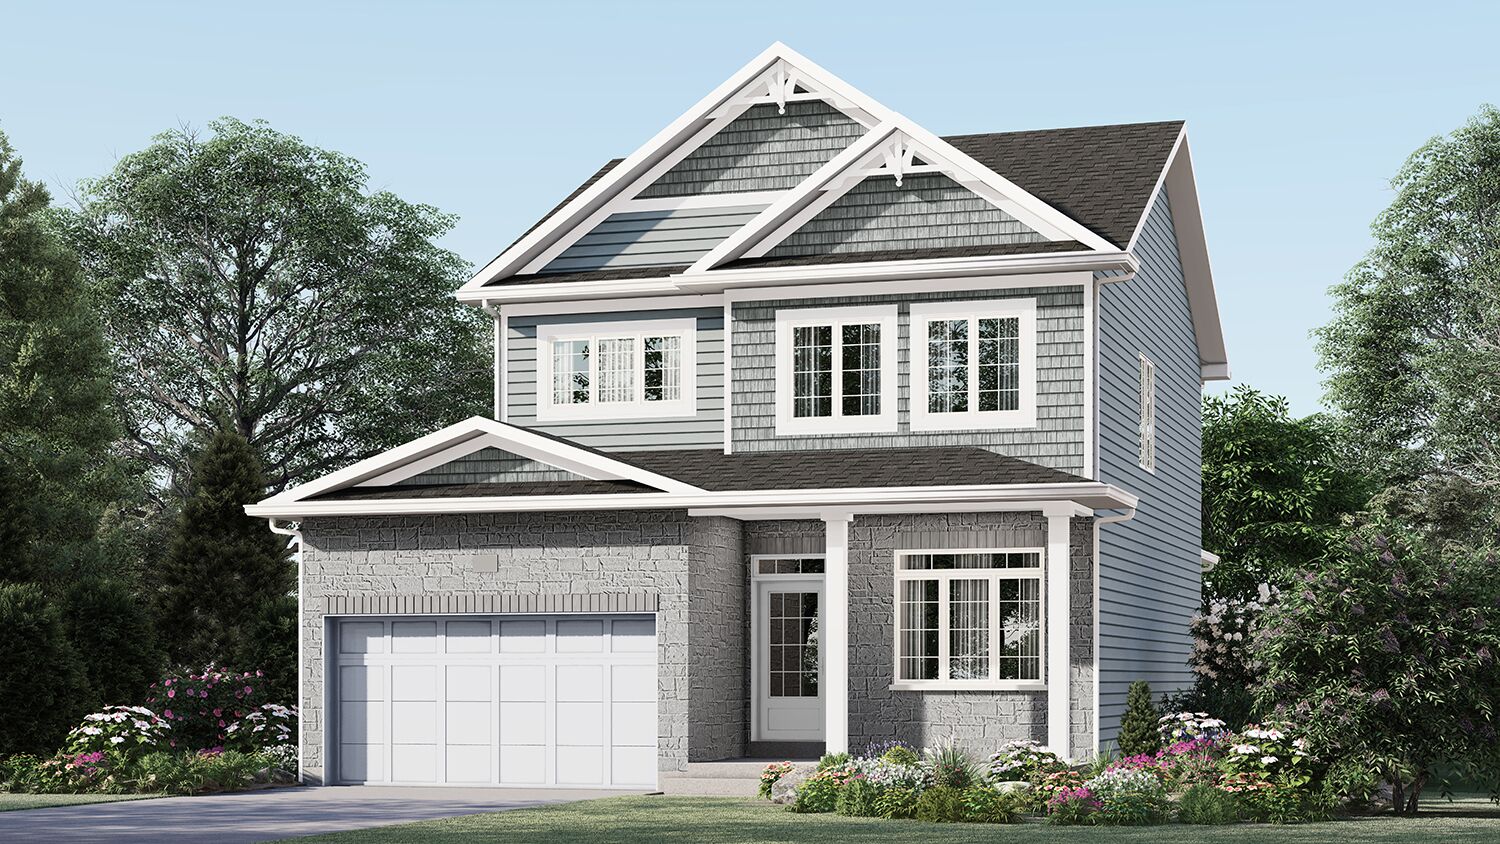 Exterior Rendering - Single Family House - Weatherby